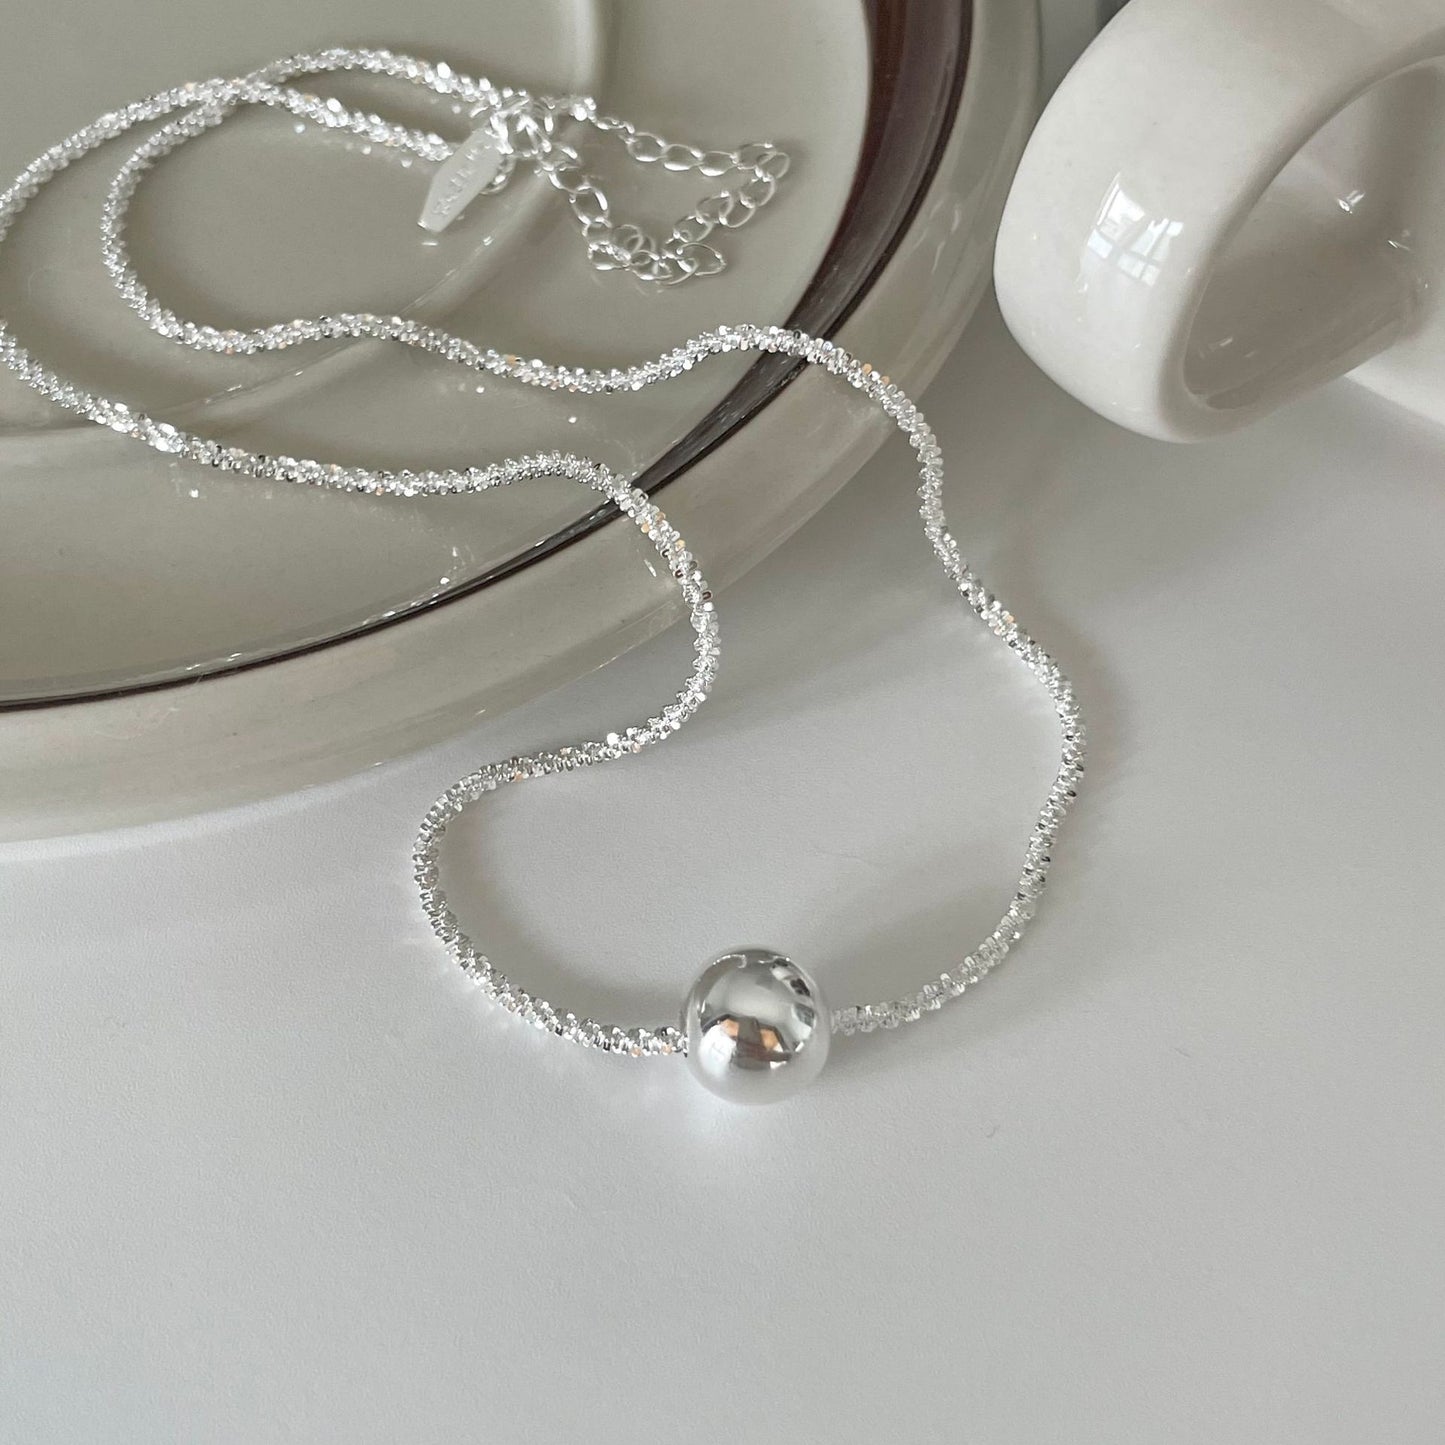 925 Sterling Silver Ball Pendant Necklace